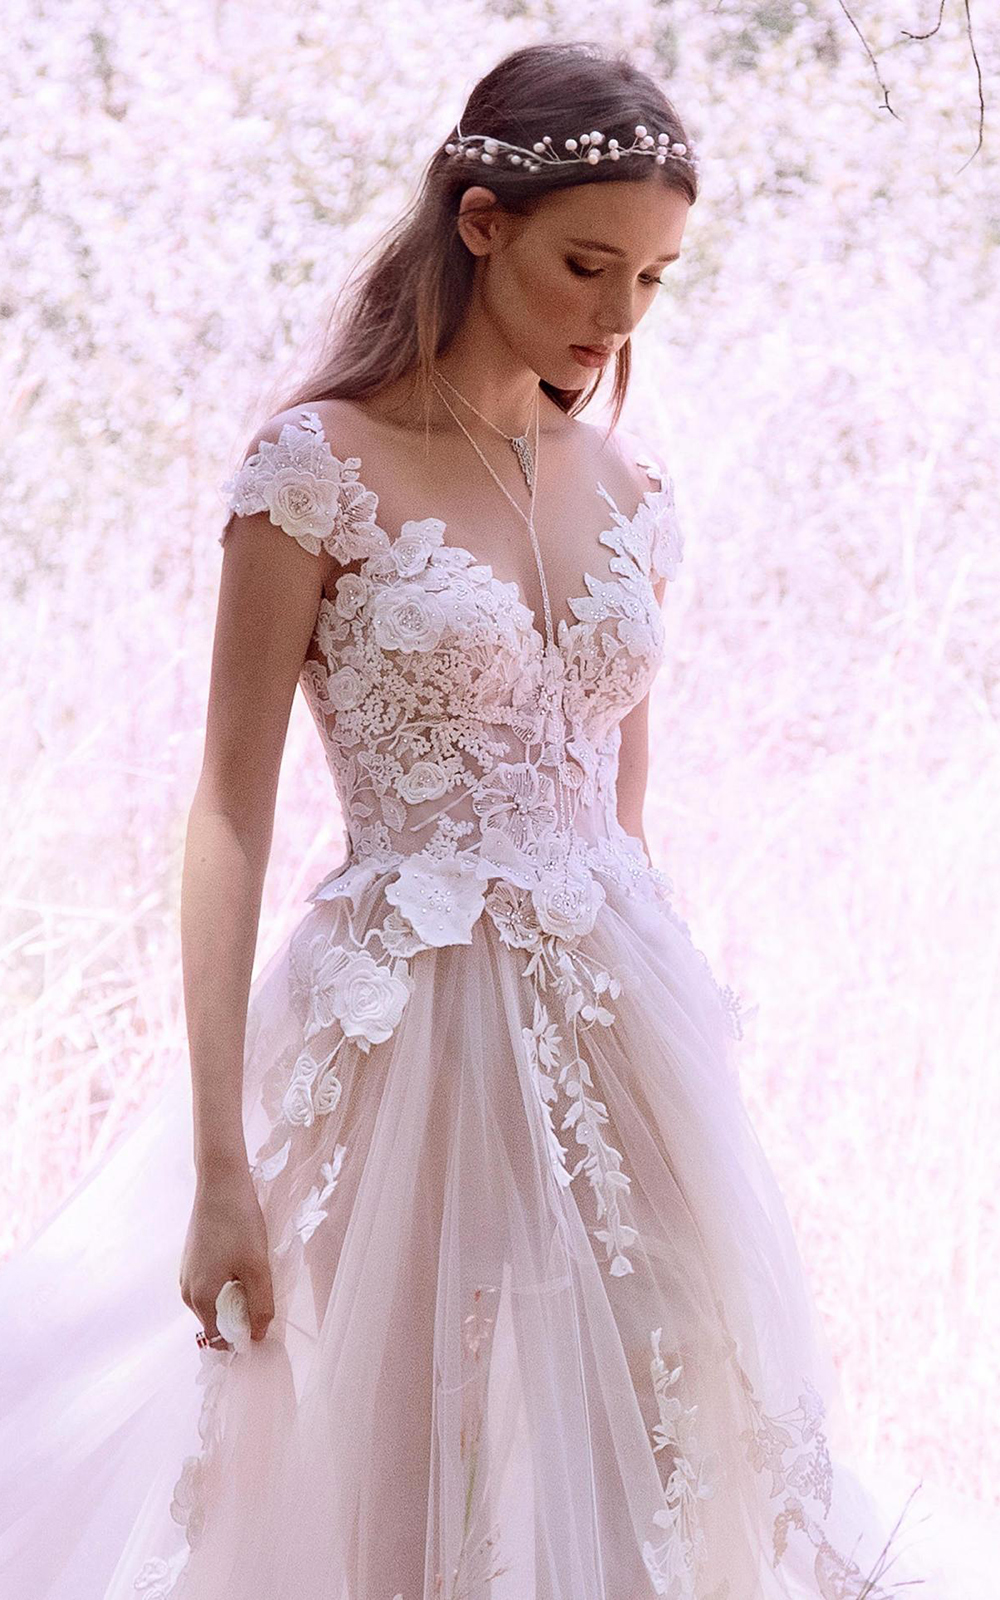 3 brides top tips for designing your own wedding dress